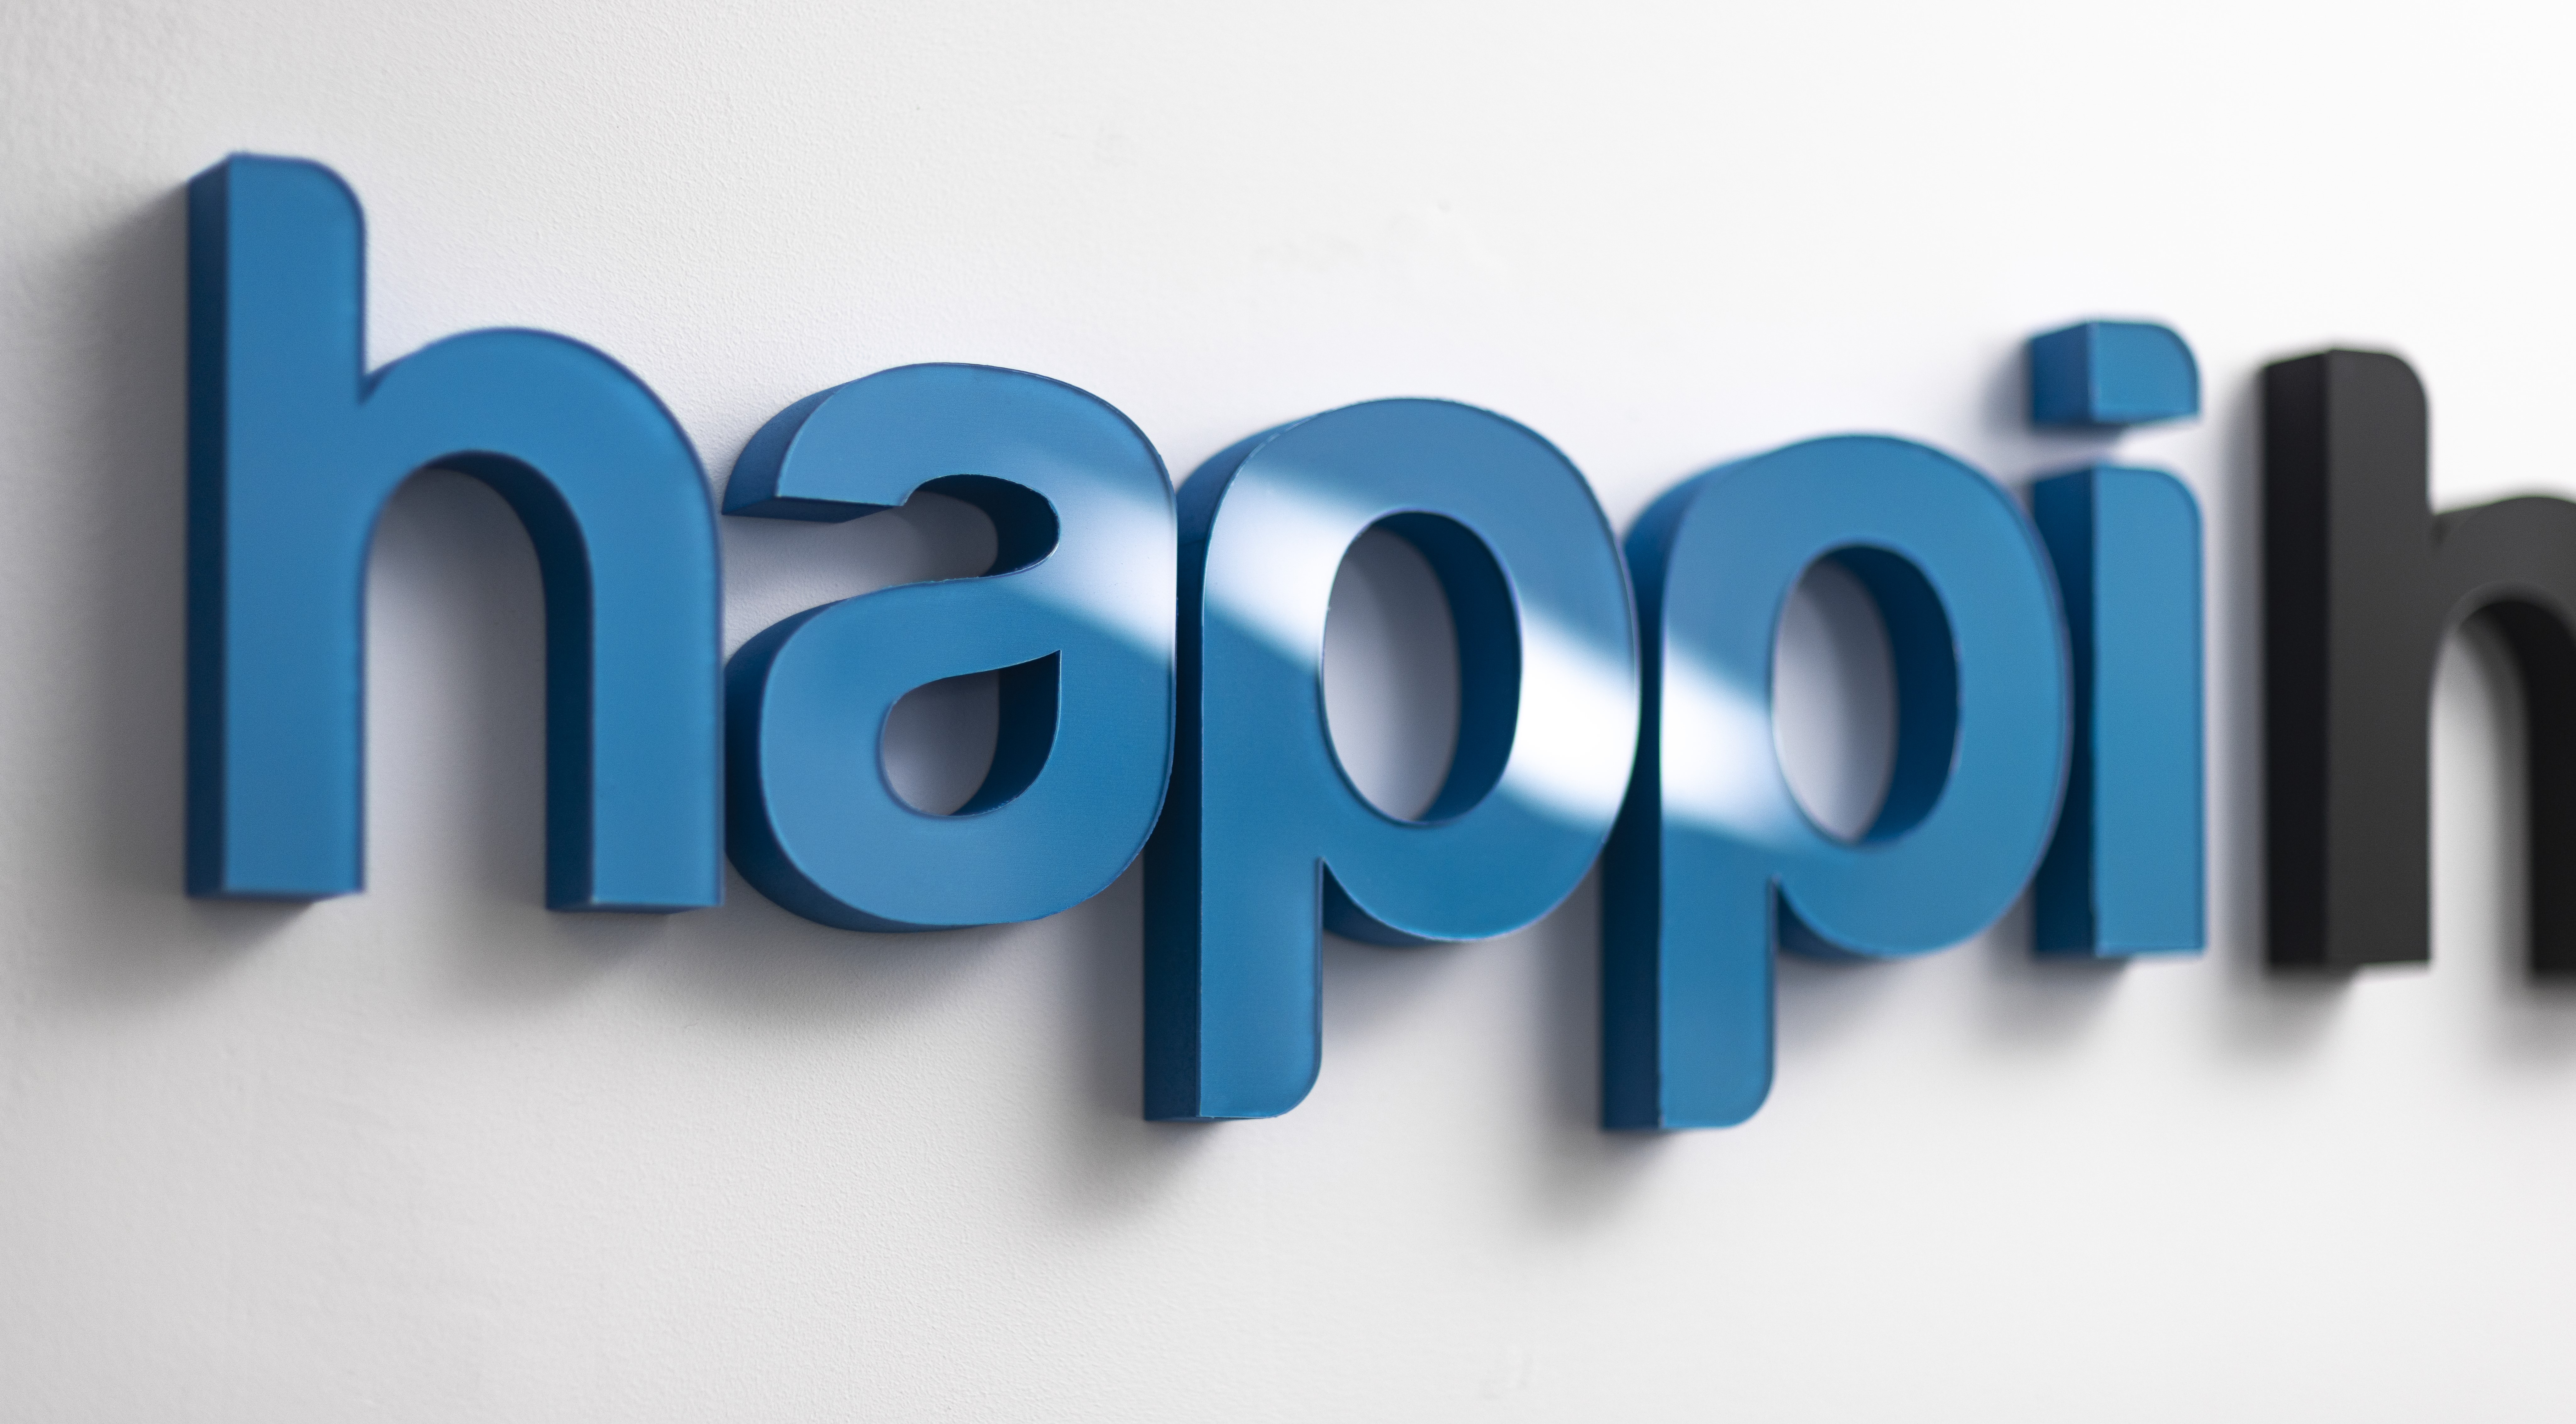 Part of the HappiHacking logo.